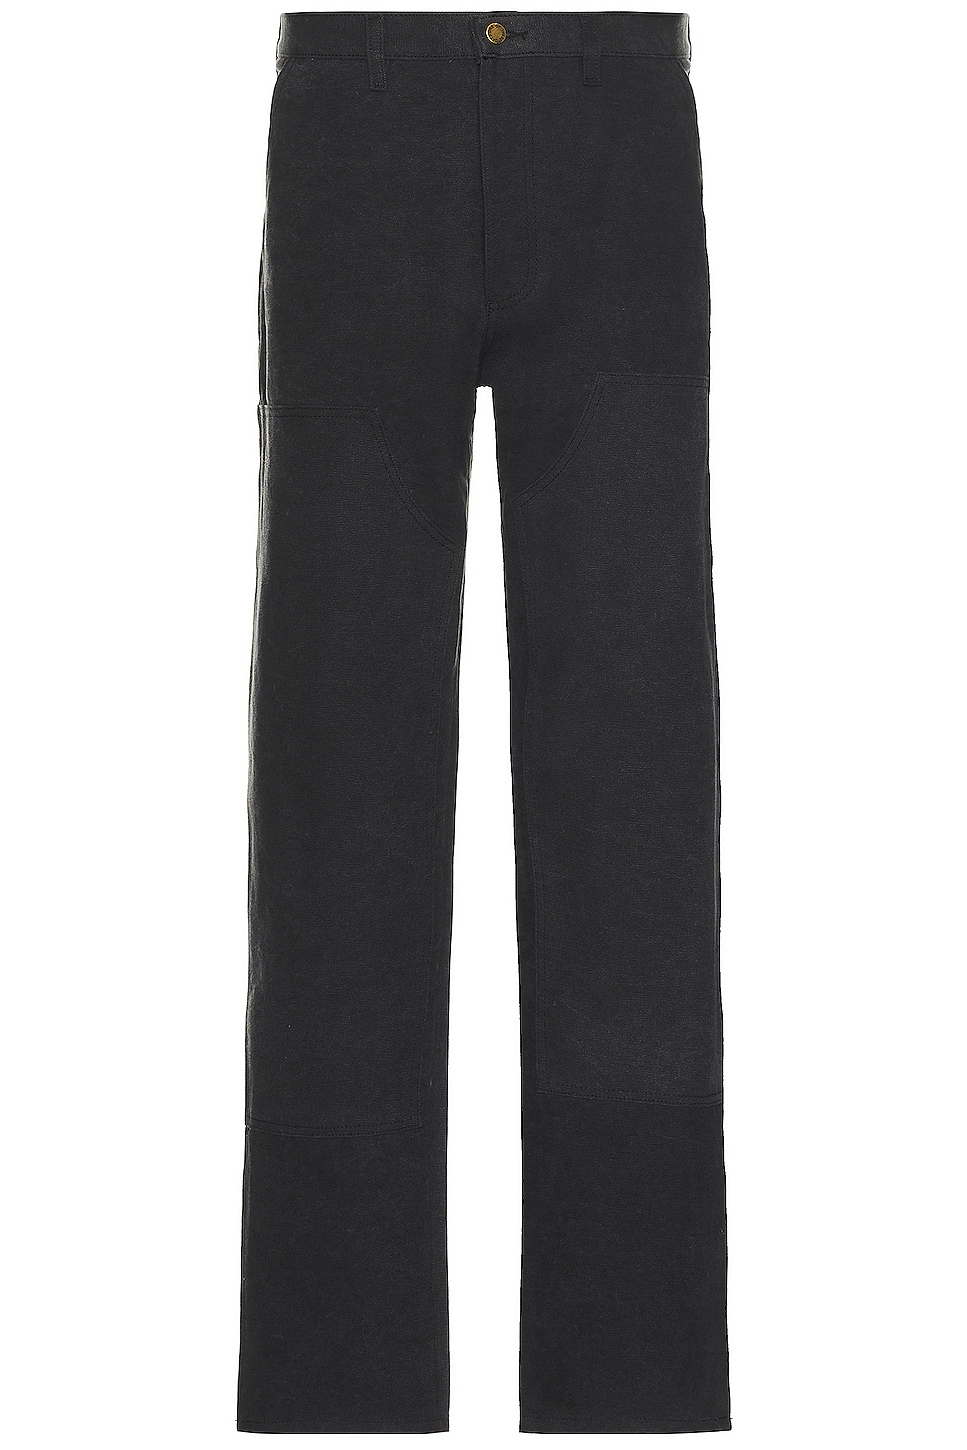 Image 1 of ONE OF THESE DAYS ONE OF THESE stateman double knee pants in Black